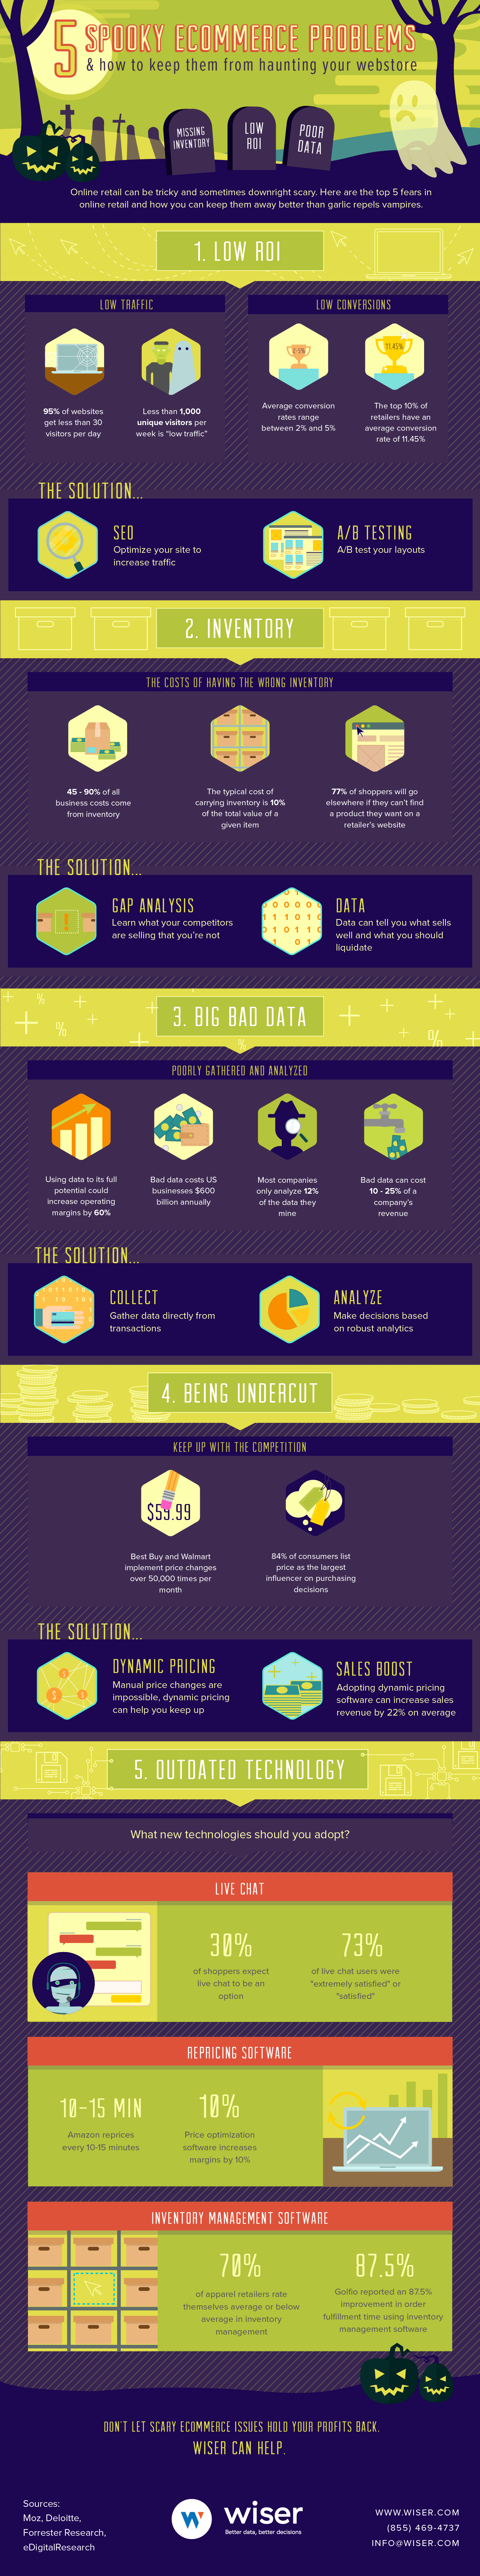 eCommerce Problems Infographic